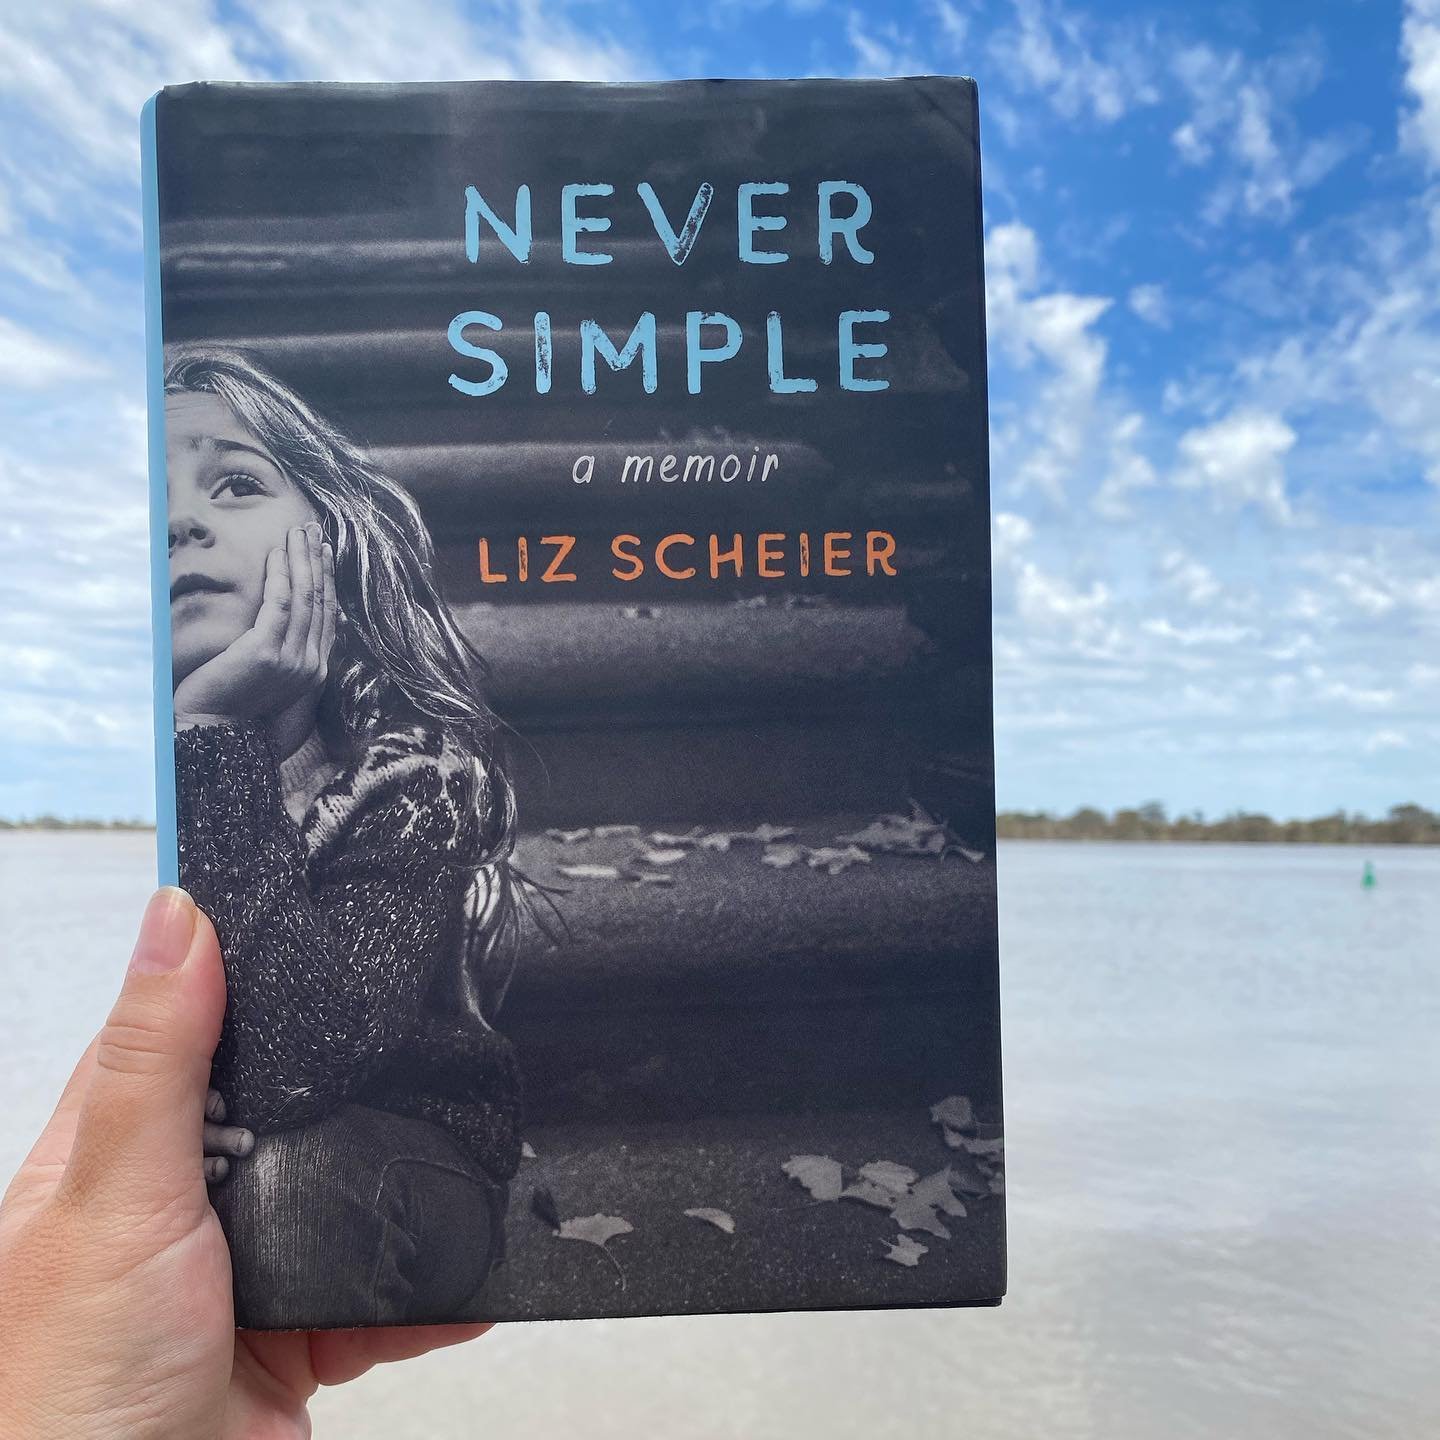 Reading the story of Liz Scheier&rsquo;s life with her mother was tumultuous to read. 

I cannot even begin to fathom what it must have been like living it. 

In &lsquo;Never Simple&rsquo;, Liz tells the story of living with her mother Judith who has